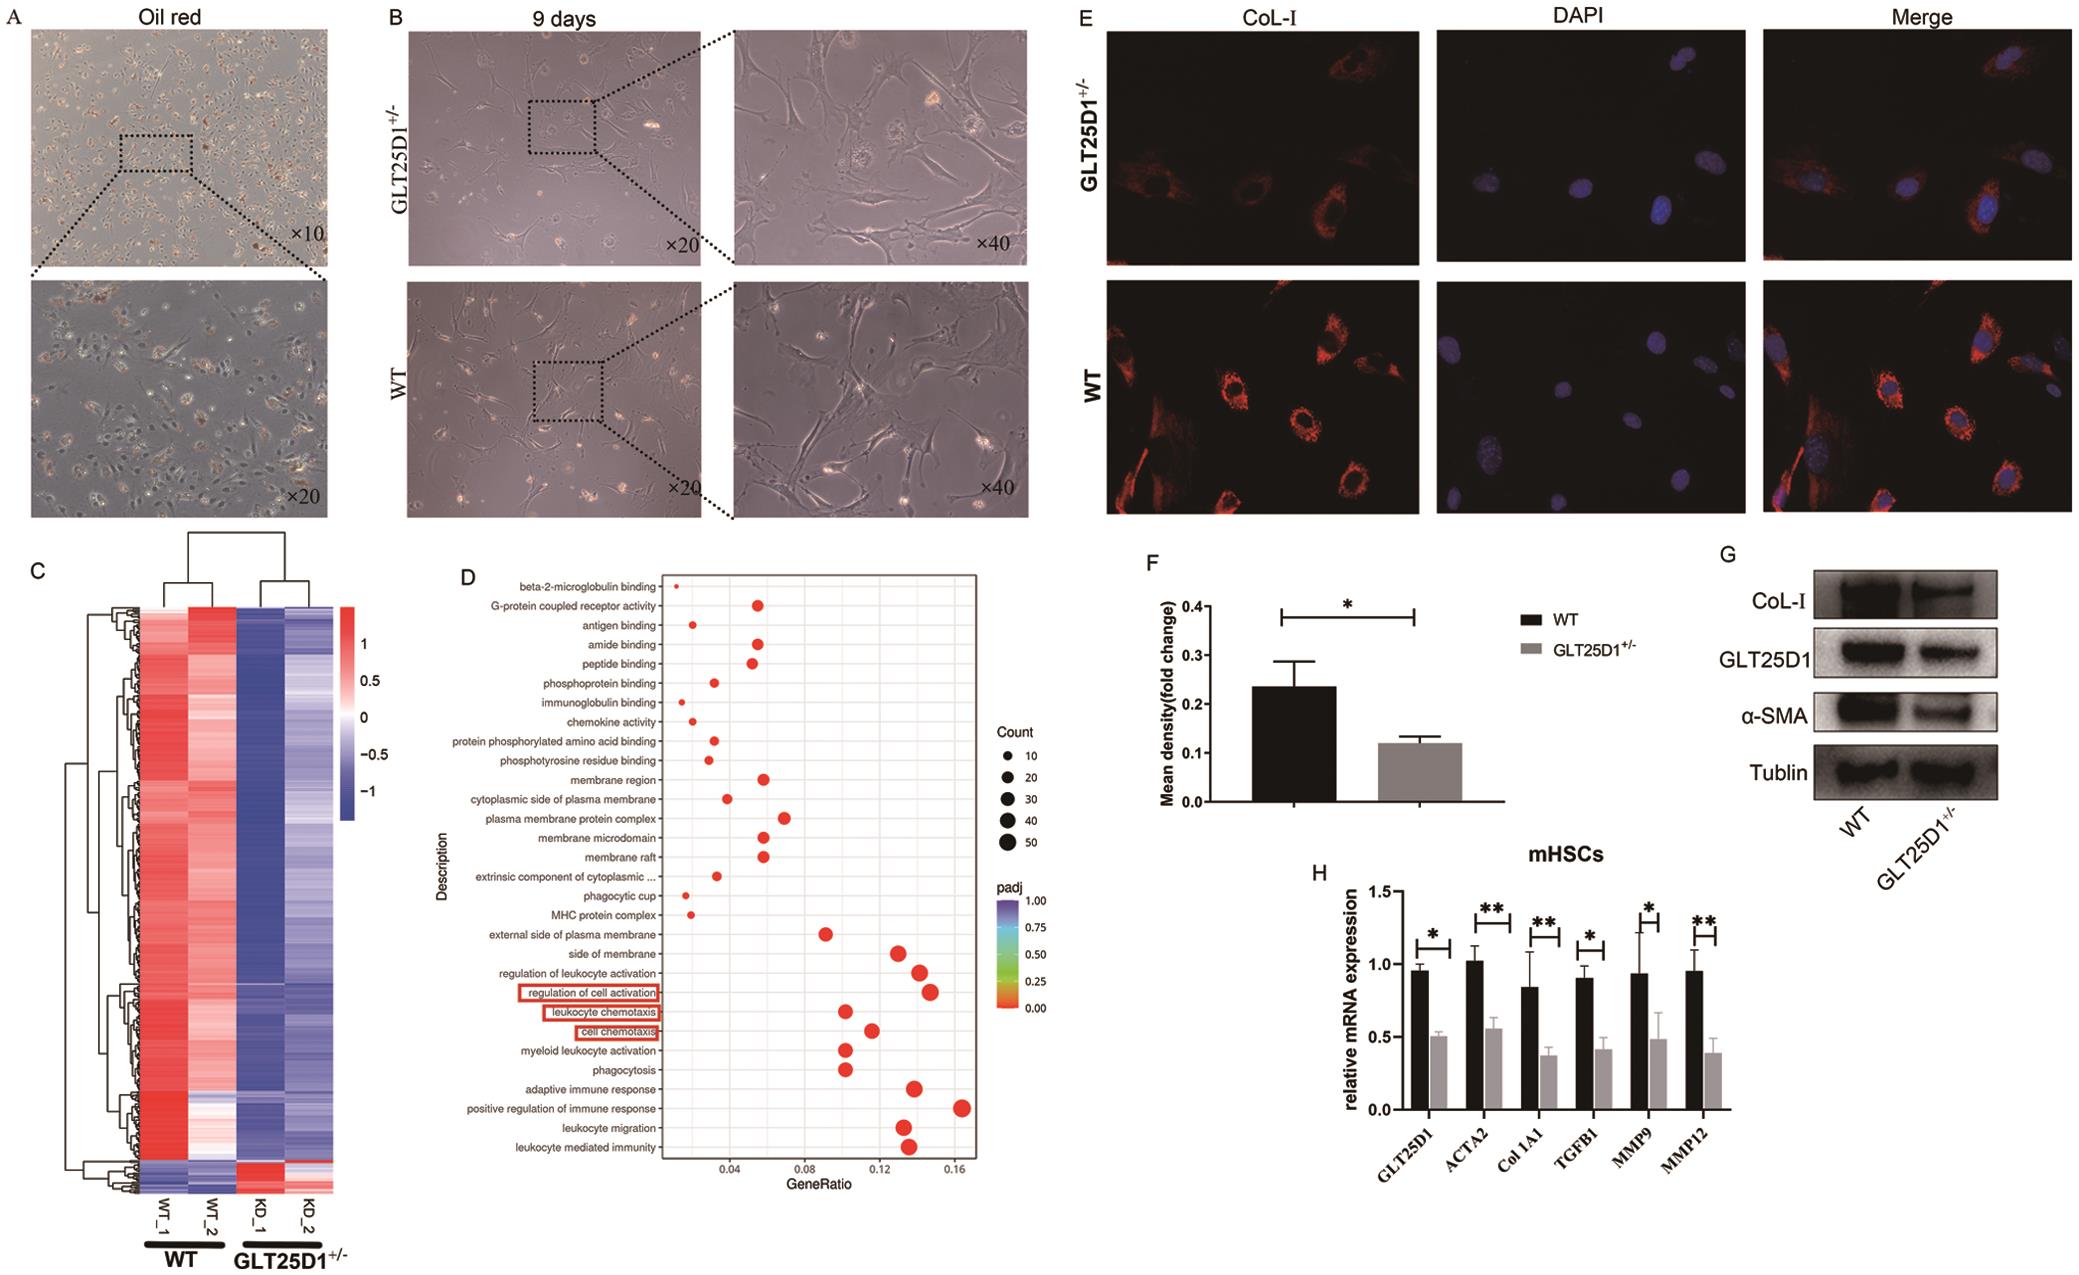 Knocking down GLT25D1 inhibits murine hepatic stellate cell (mHSC) activation and collagen expression.